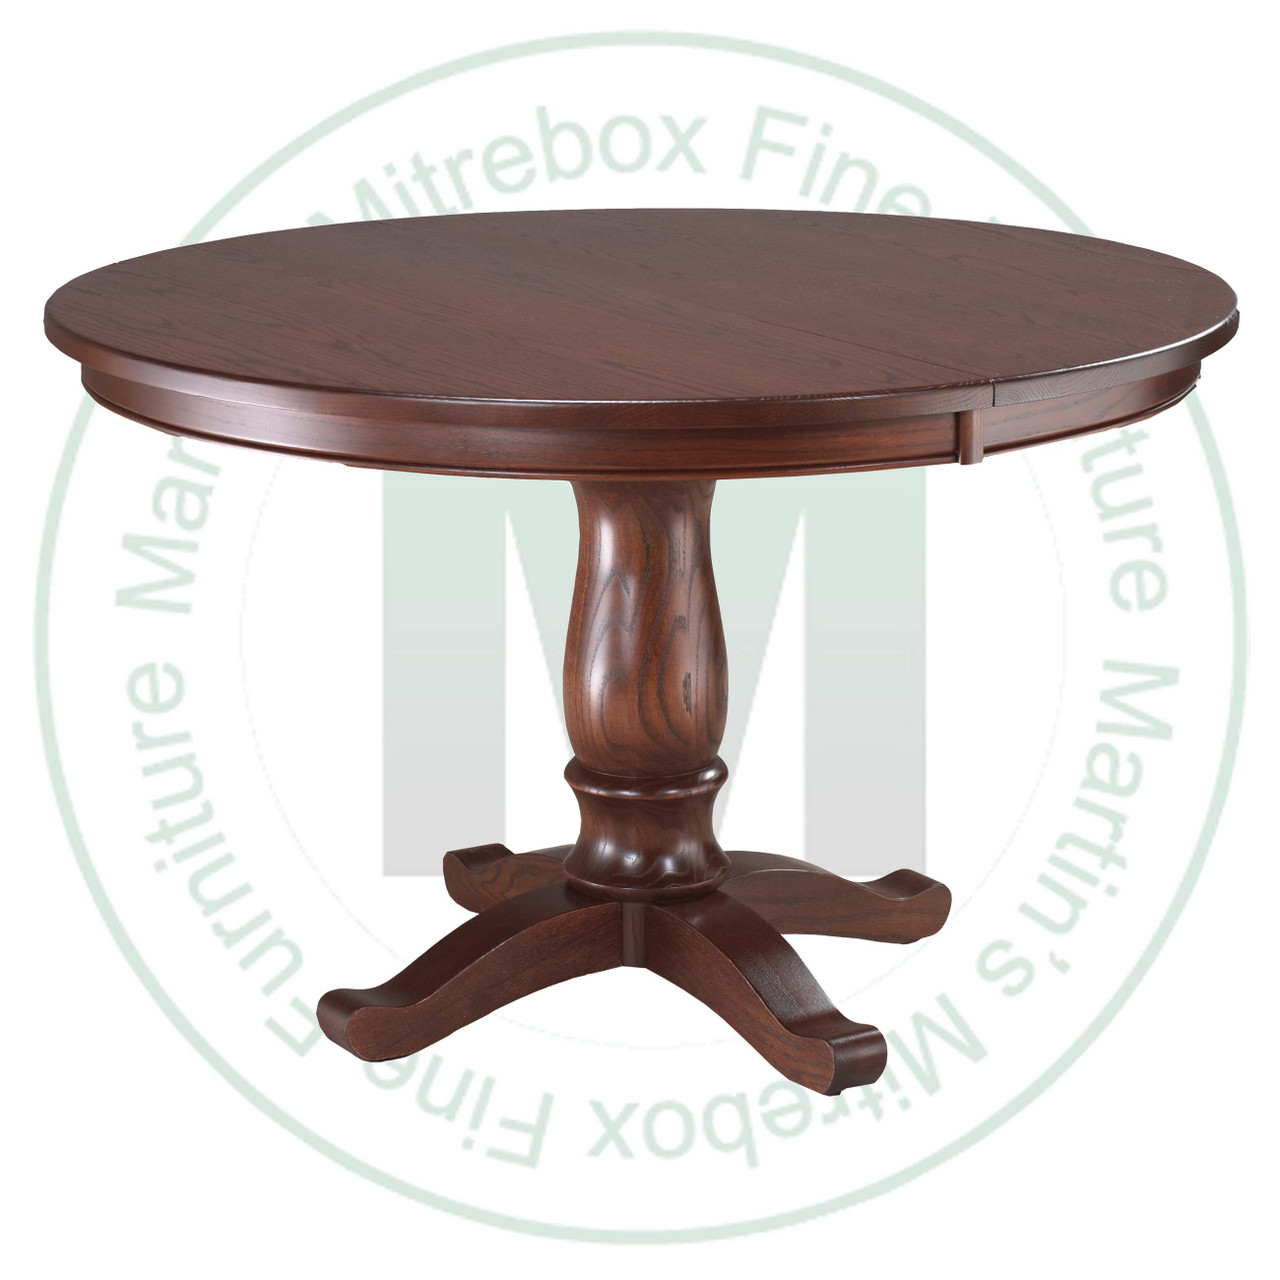 Maple Kimberly Crest Single Pedestal Table 42''D x 54''W x 30''H Round Solid Table